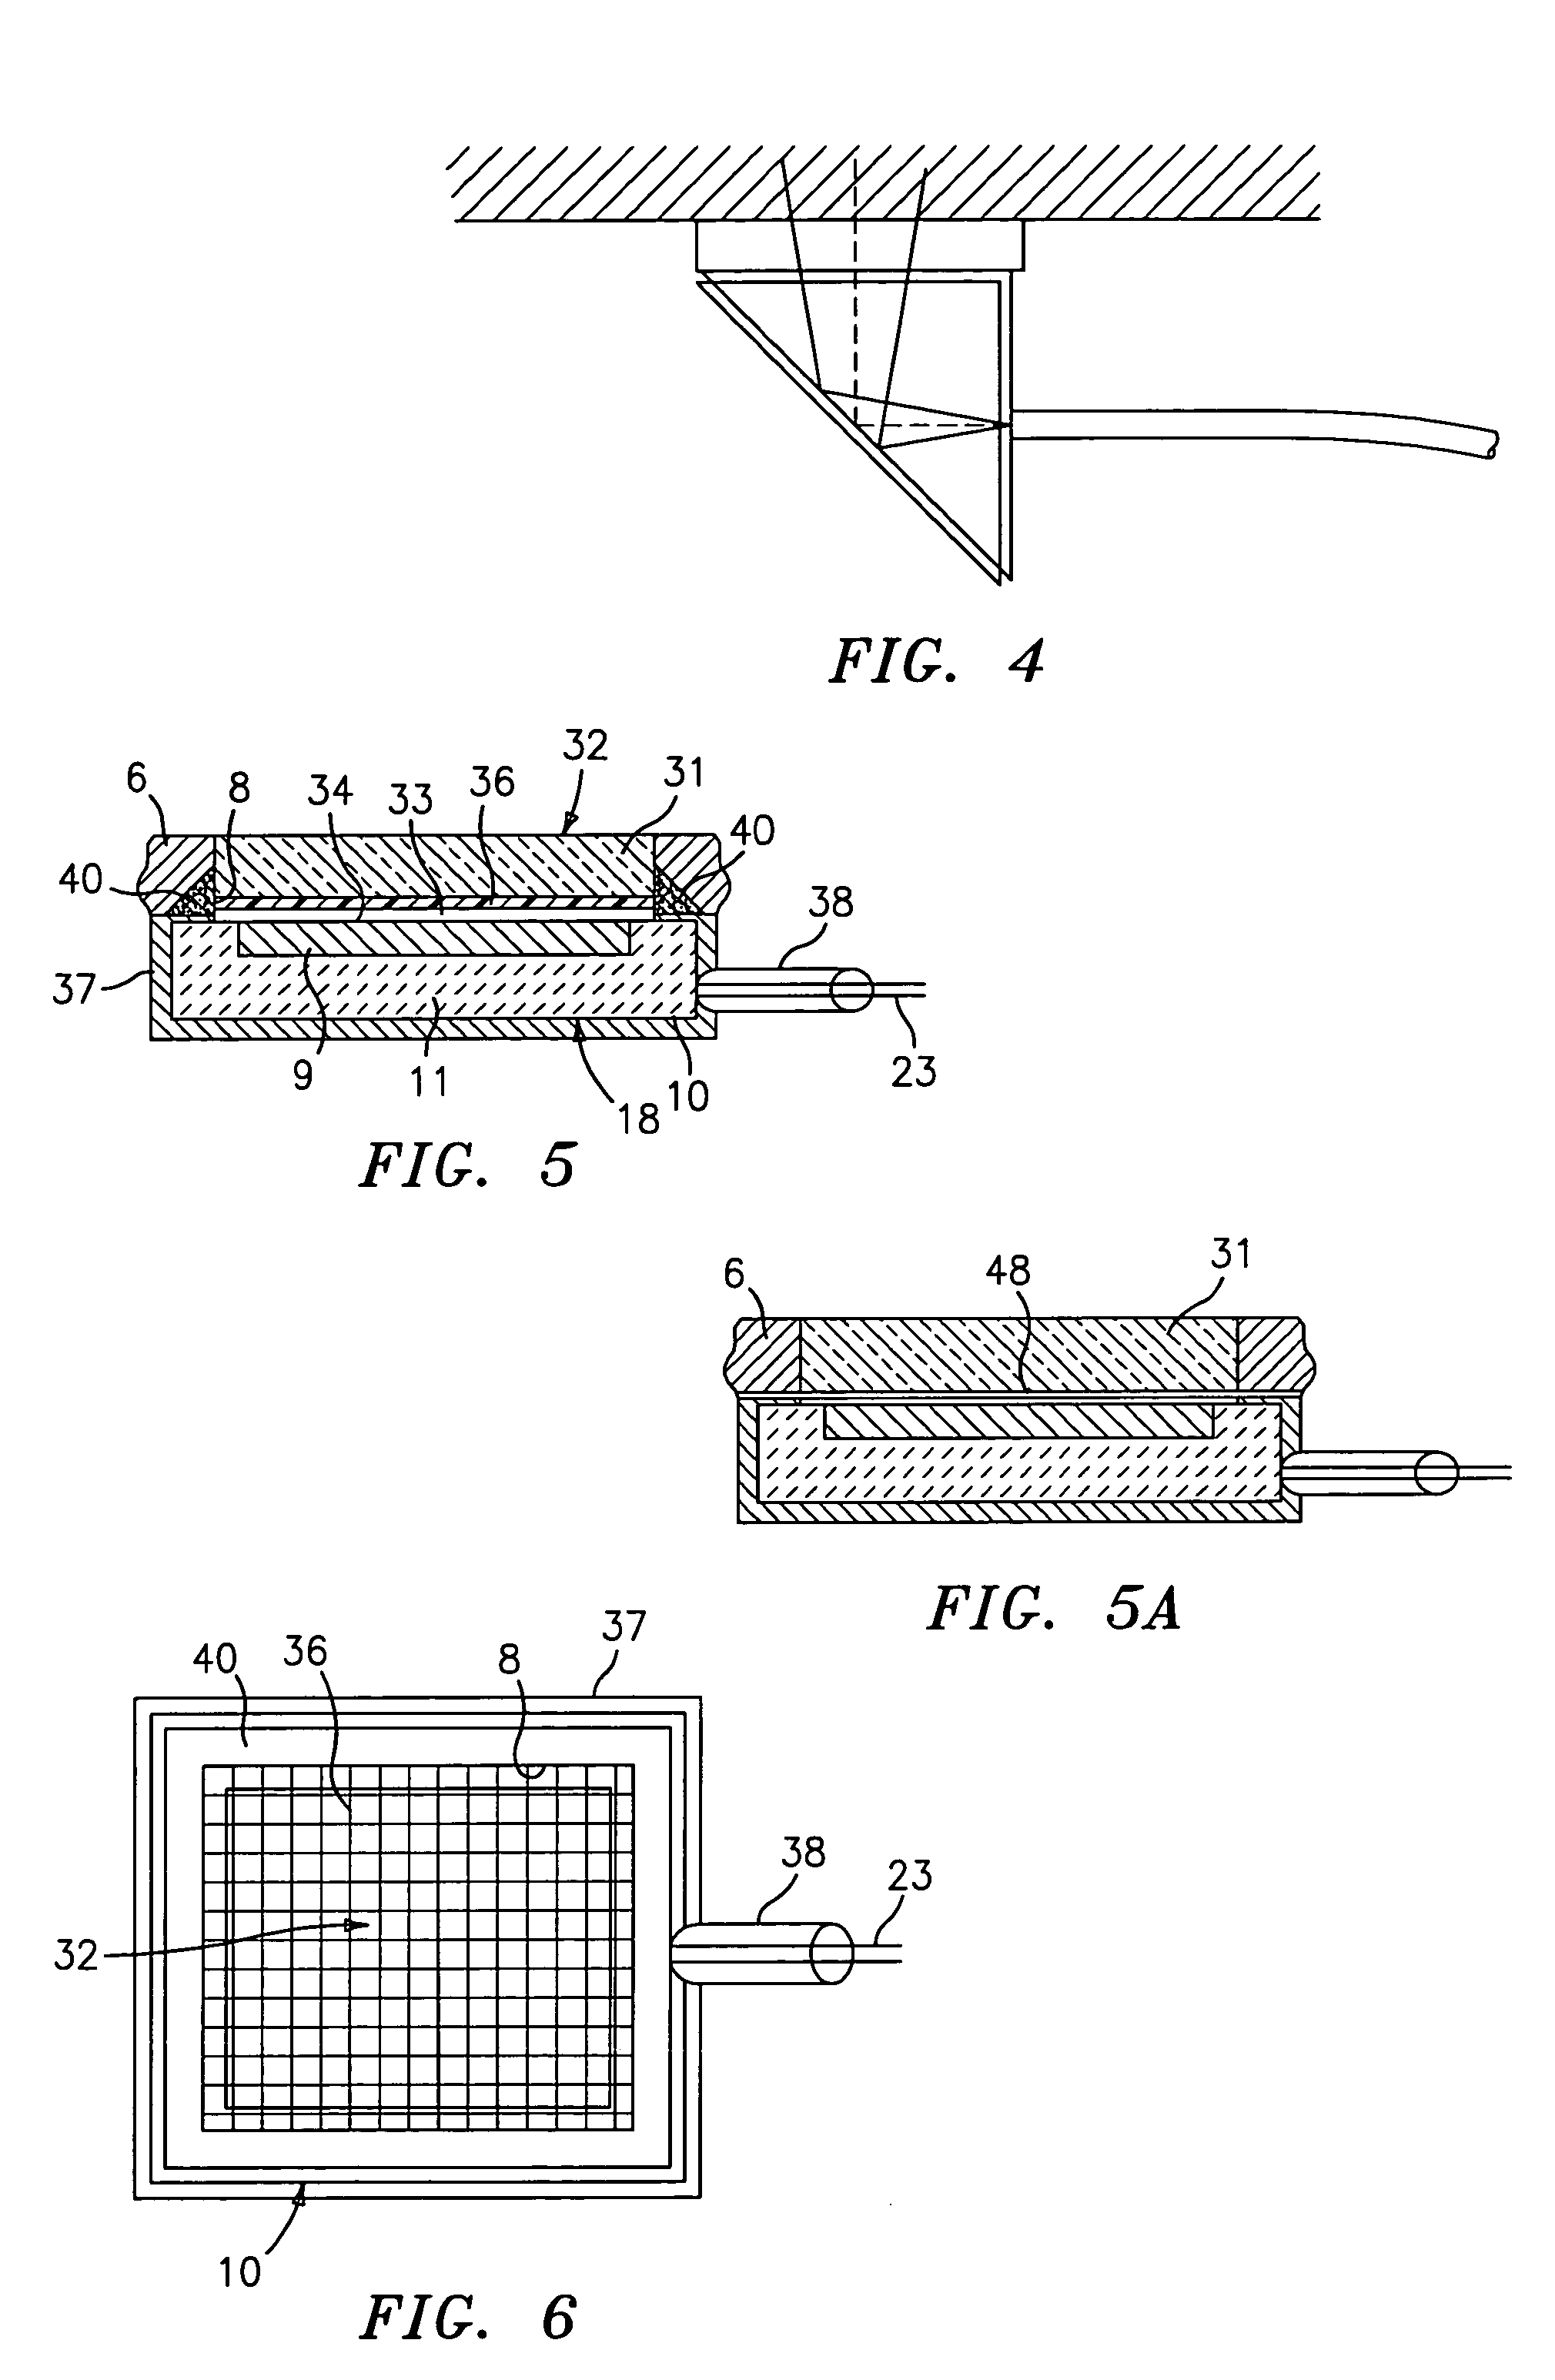 Laser diode optical transducer assembly for non-invasive spectrophotometric blood oxygenation monitoring